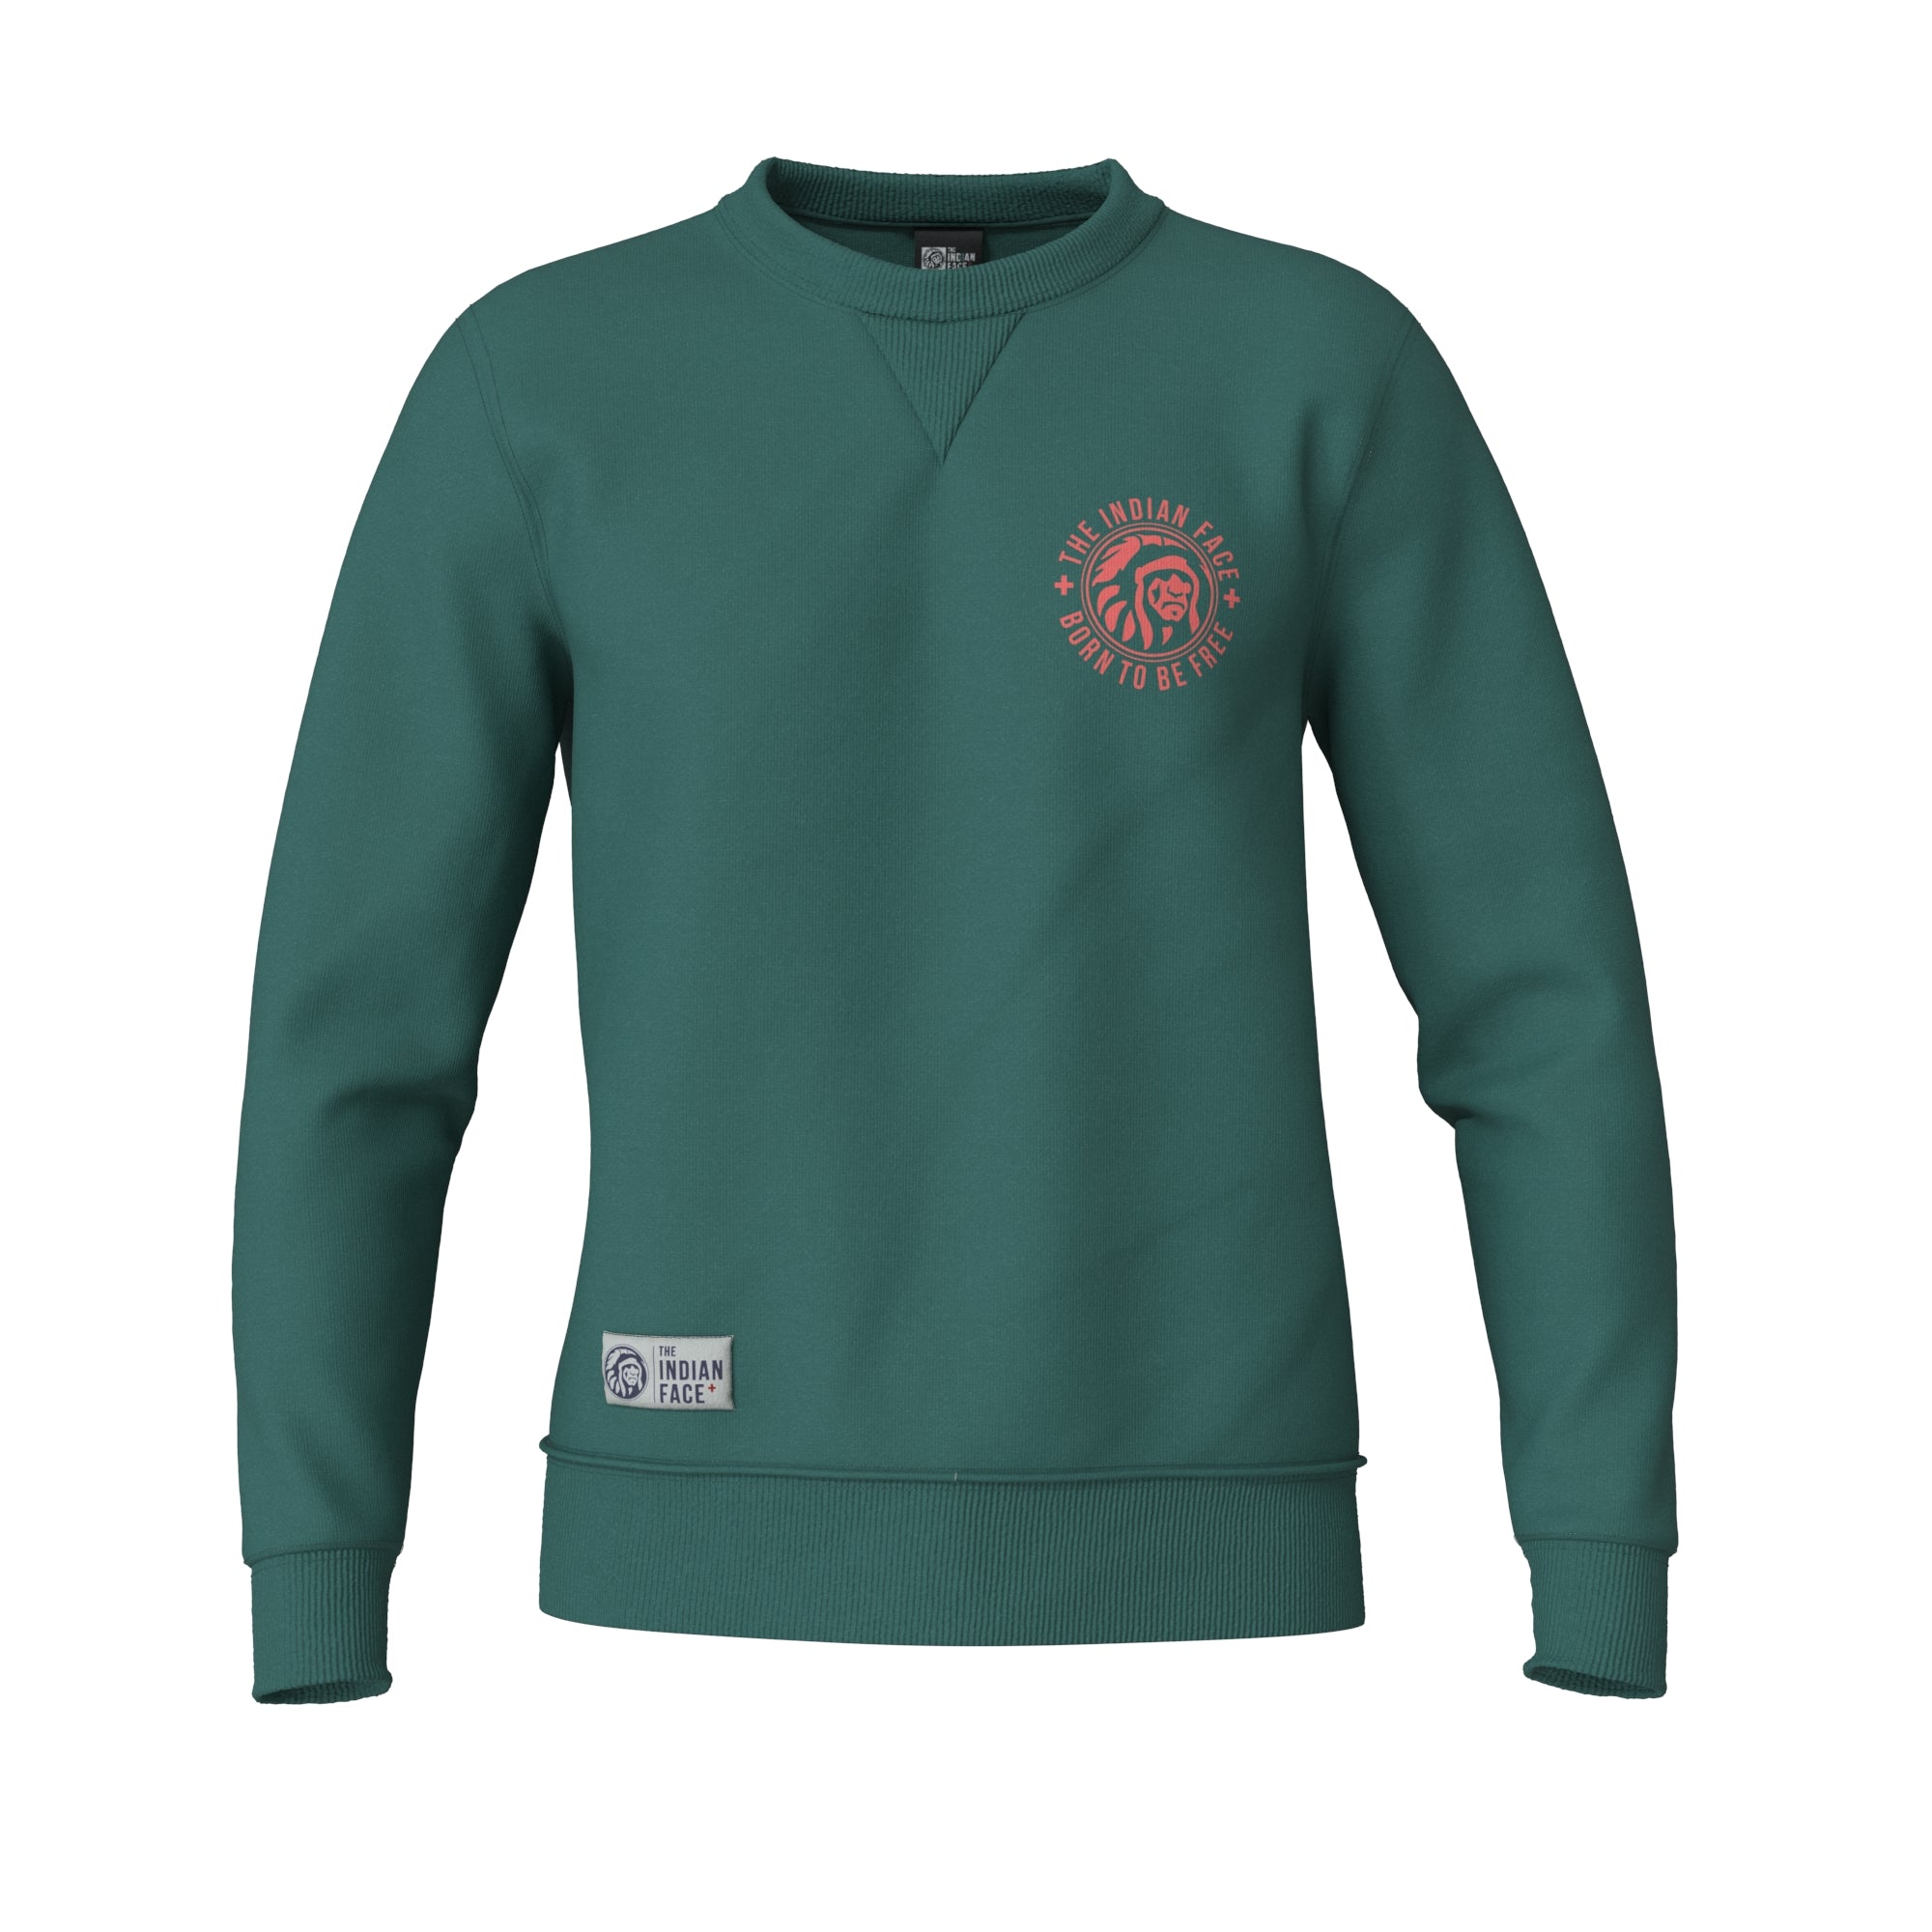 Sudadera The Indian Face Soul - verde - 